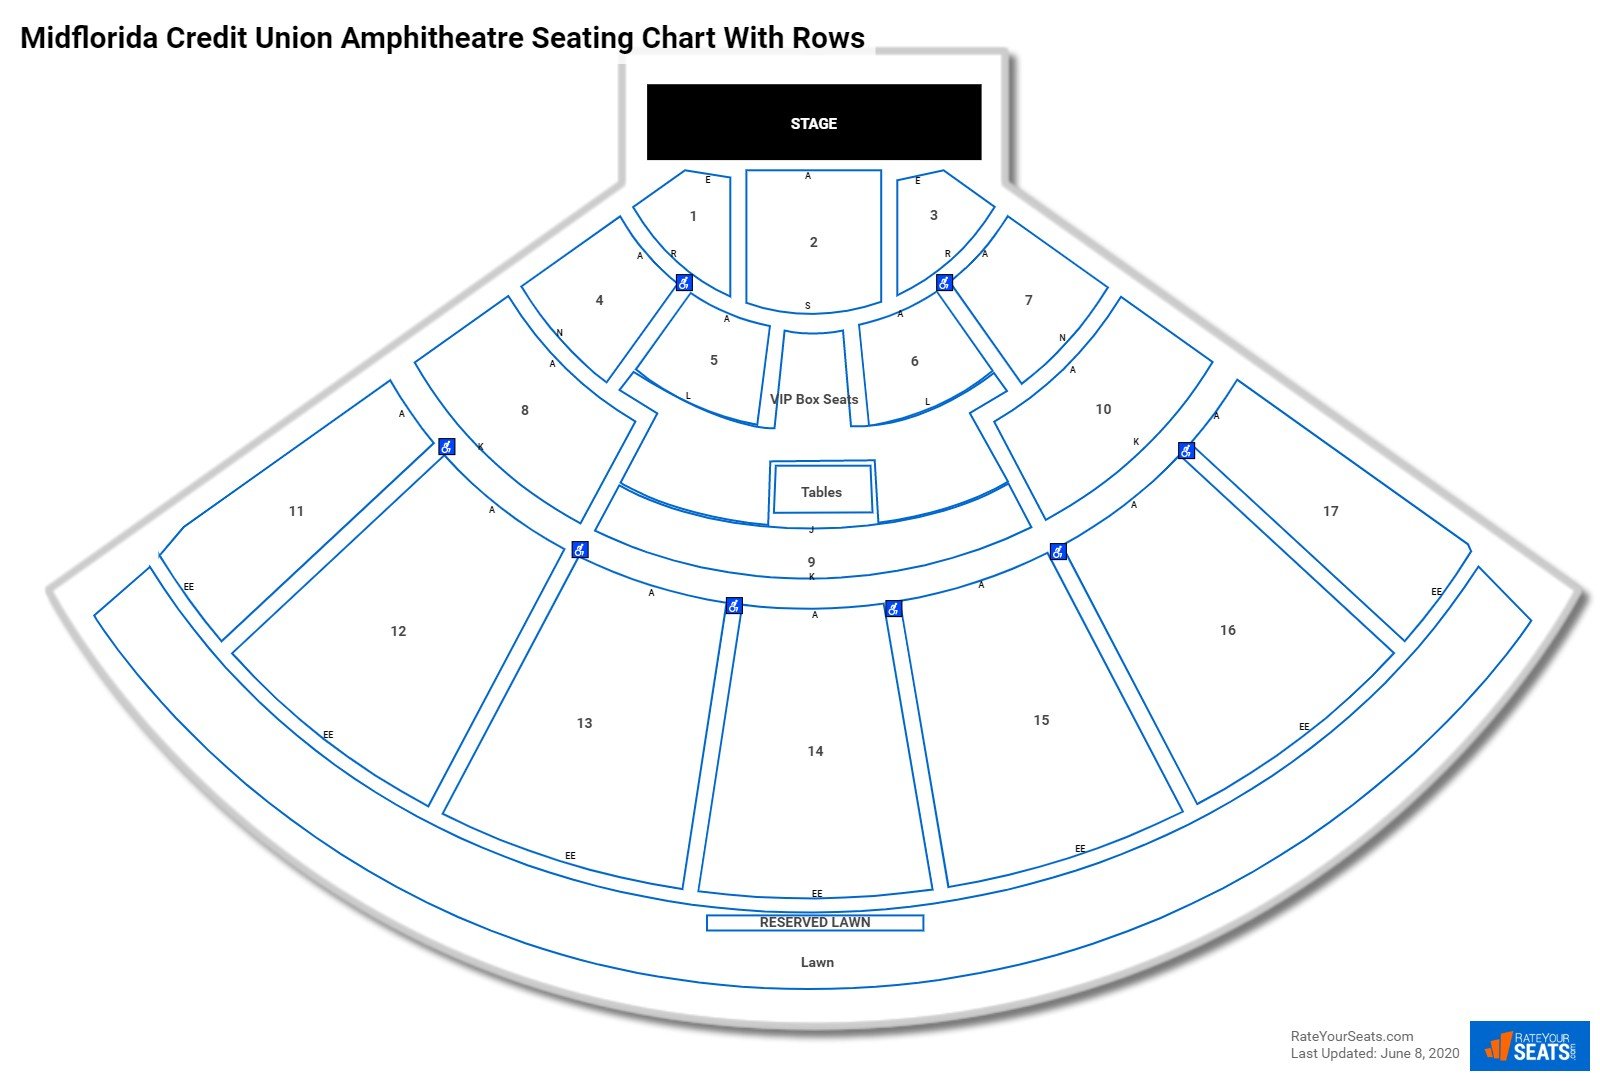 Midflorida Credit Union Amphitheatre seating chart with row numbers